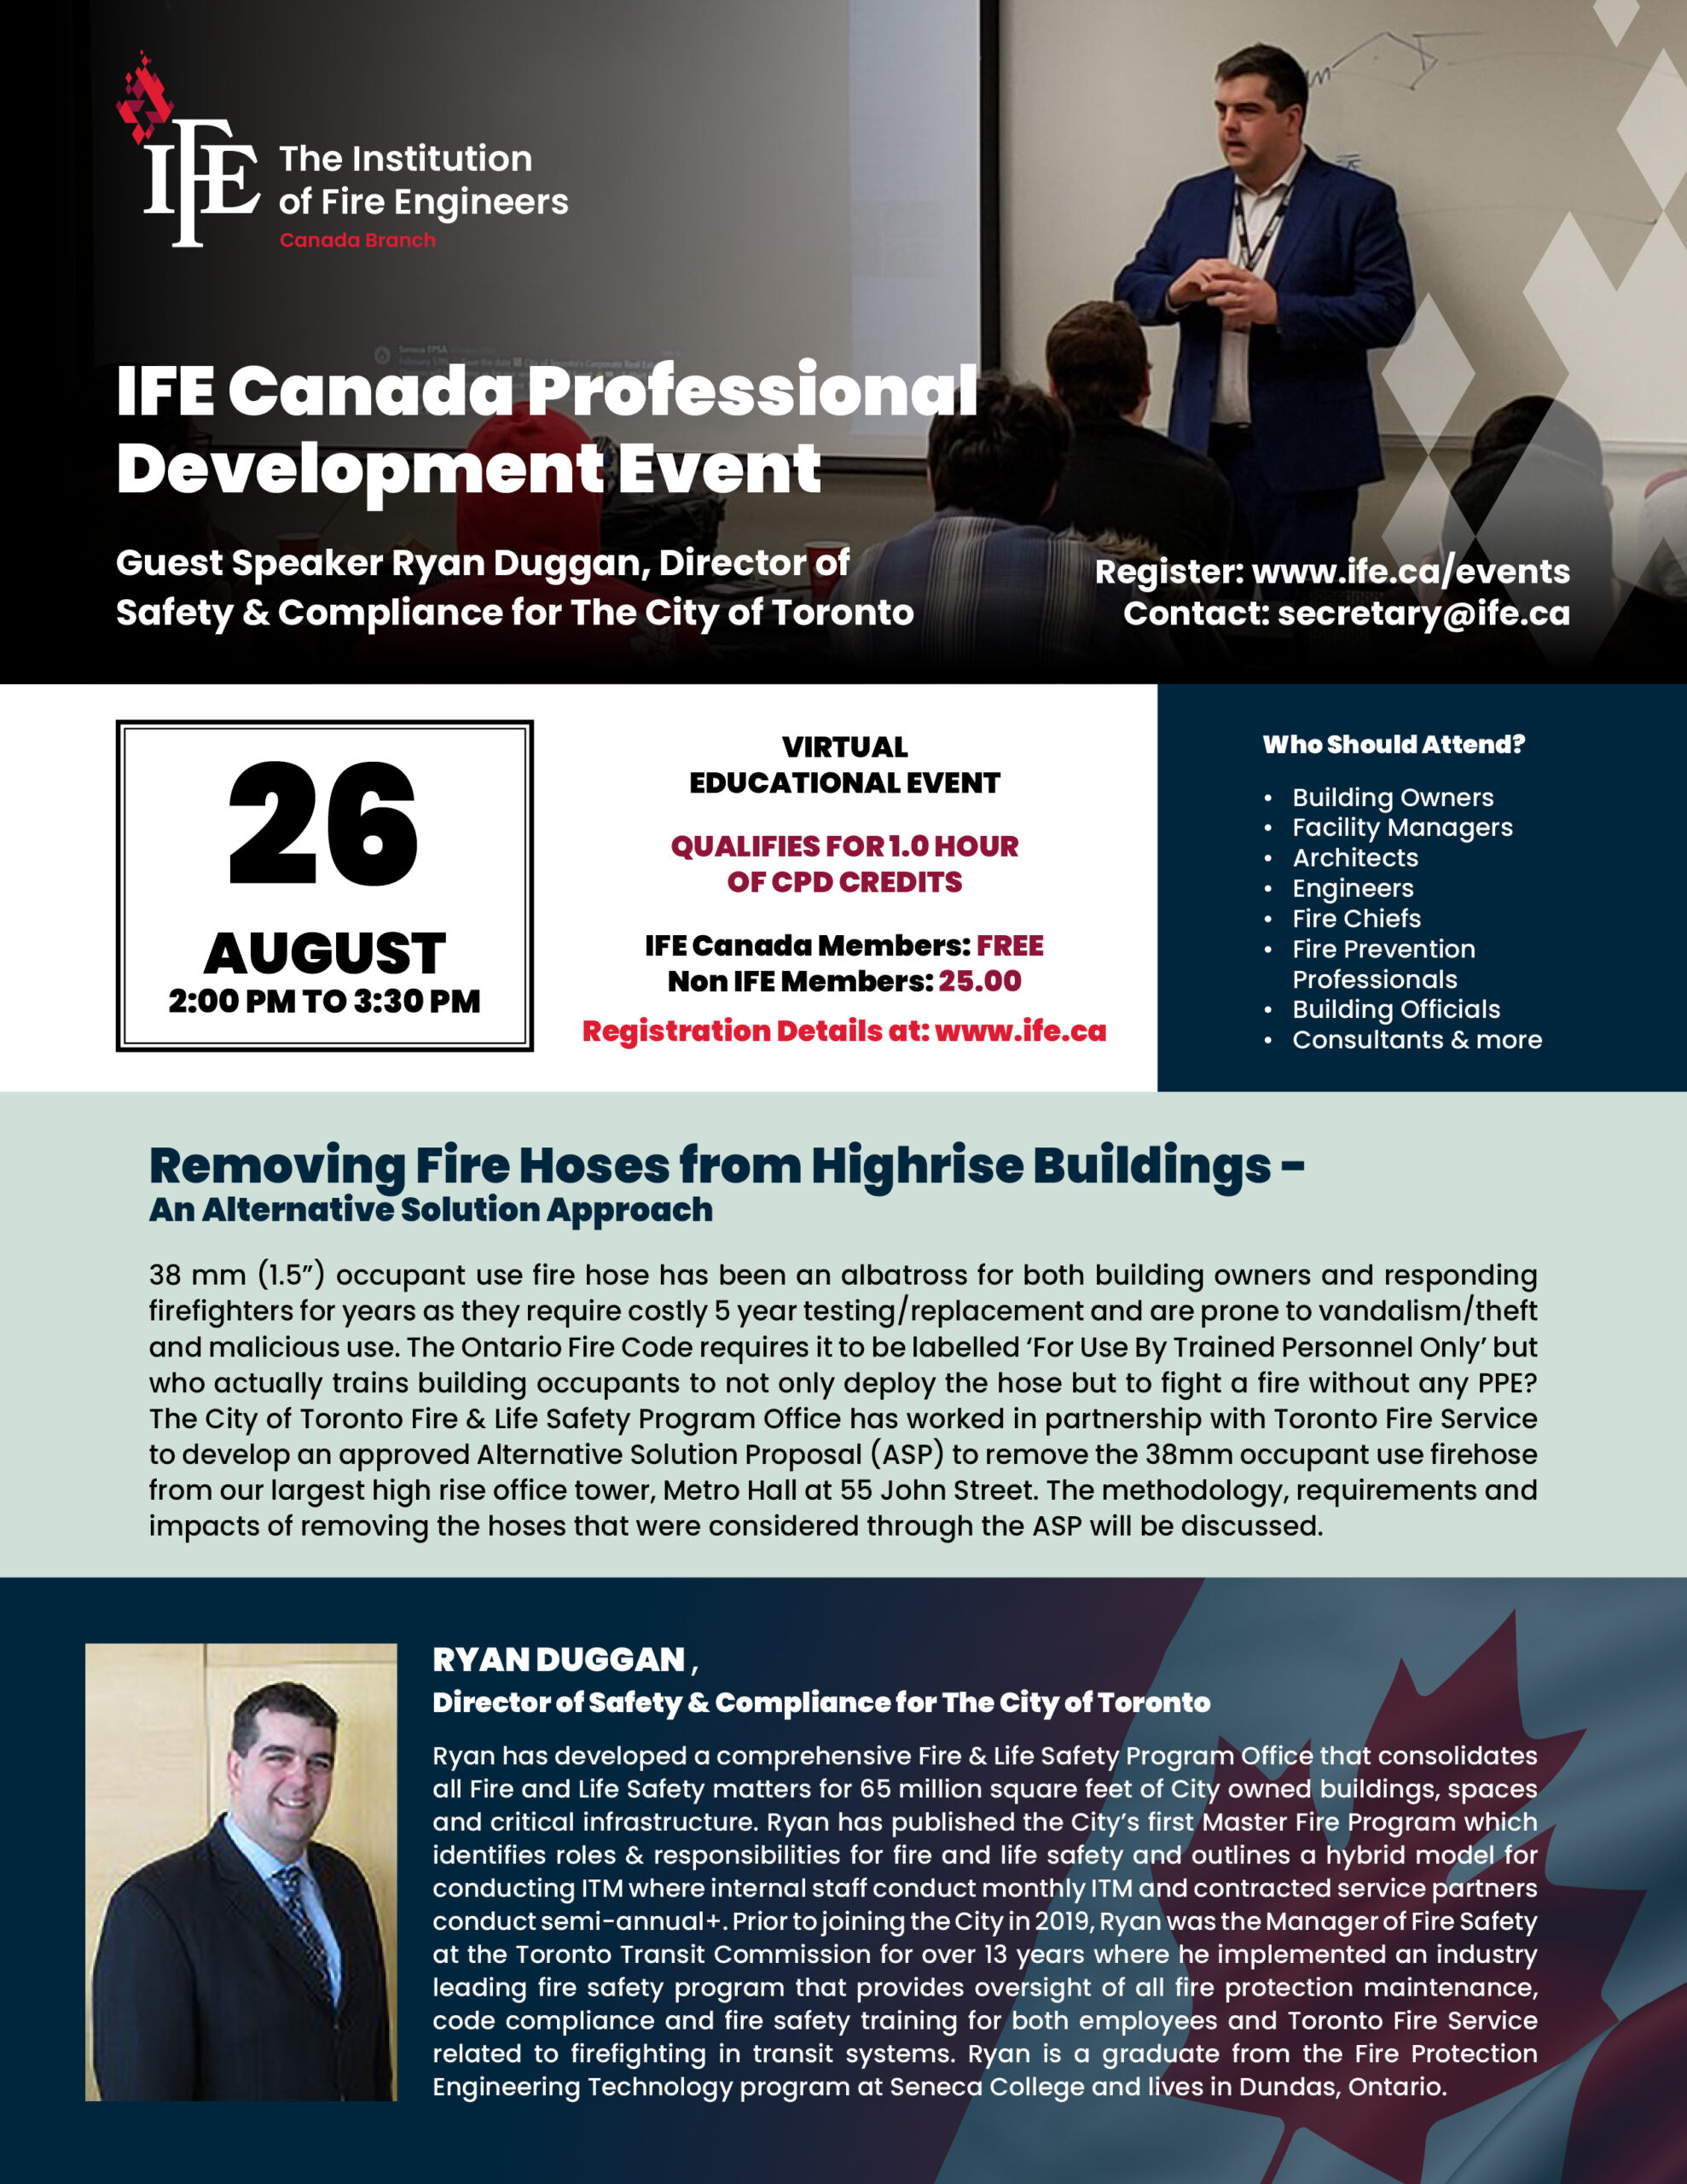 Infographic for the IFE Professional Development Event